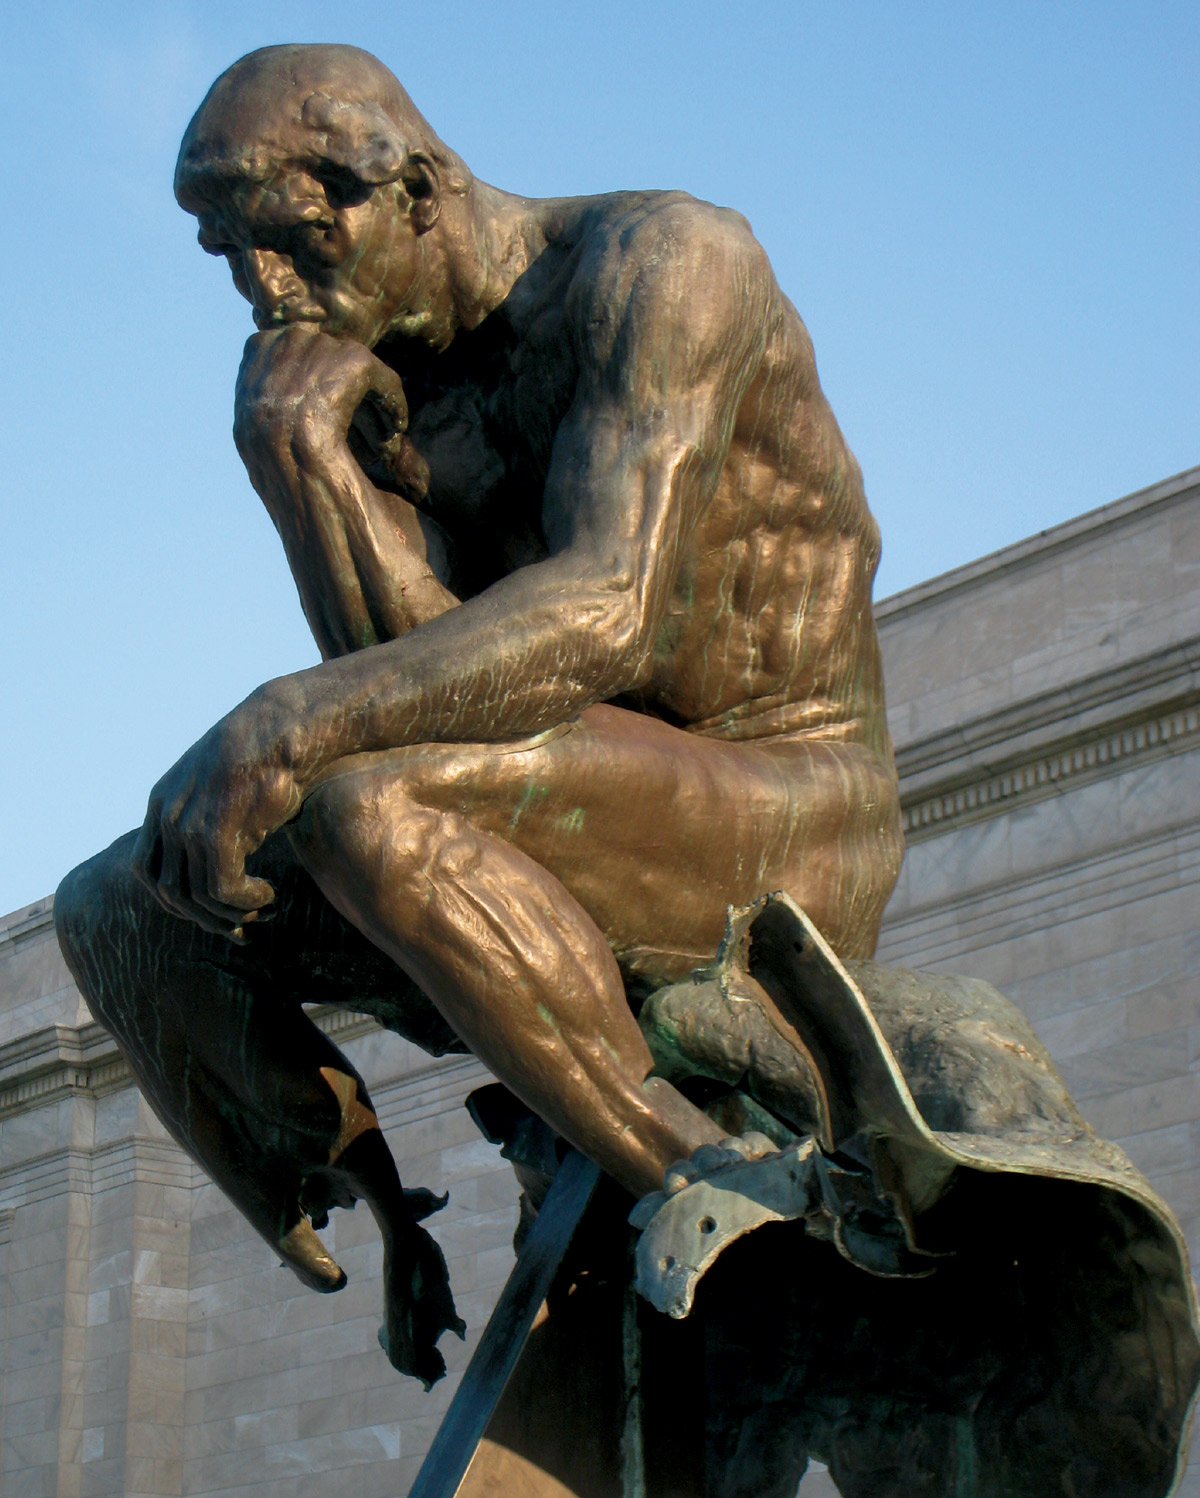 Rodin’s unrestored Thinker at the Cleveland Museum of Art. On the night of 24 March 1970, a bomb placed on its plinth destroyed the figure’s bottom half.